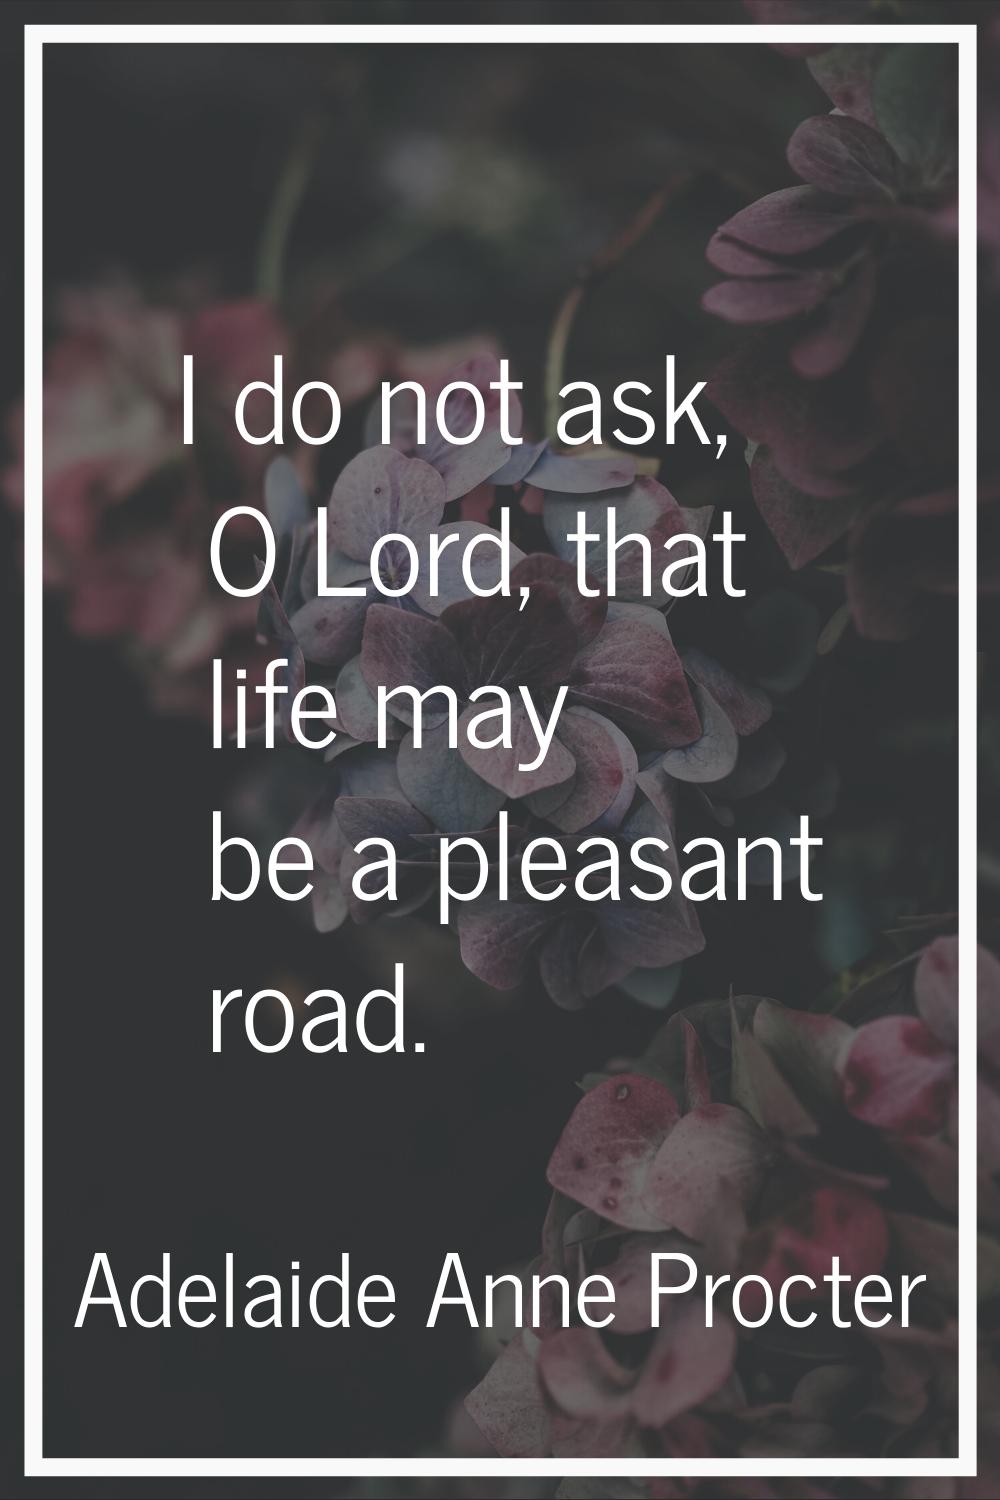 I do not ask, O Lord, that life may be a pleasant road.